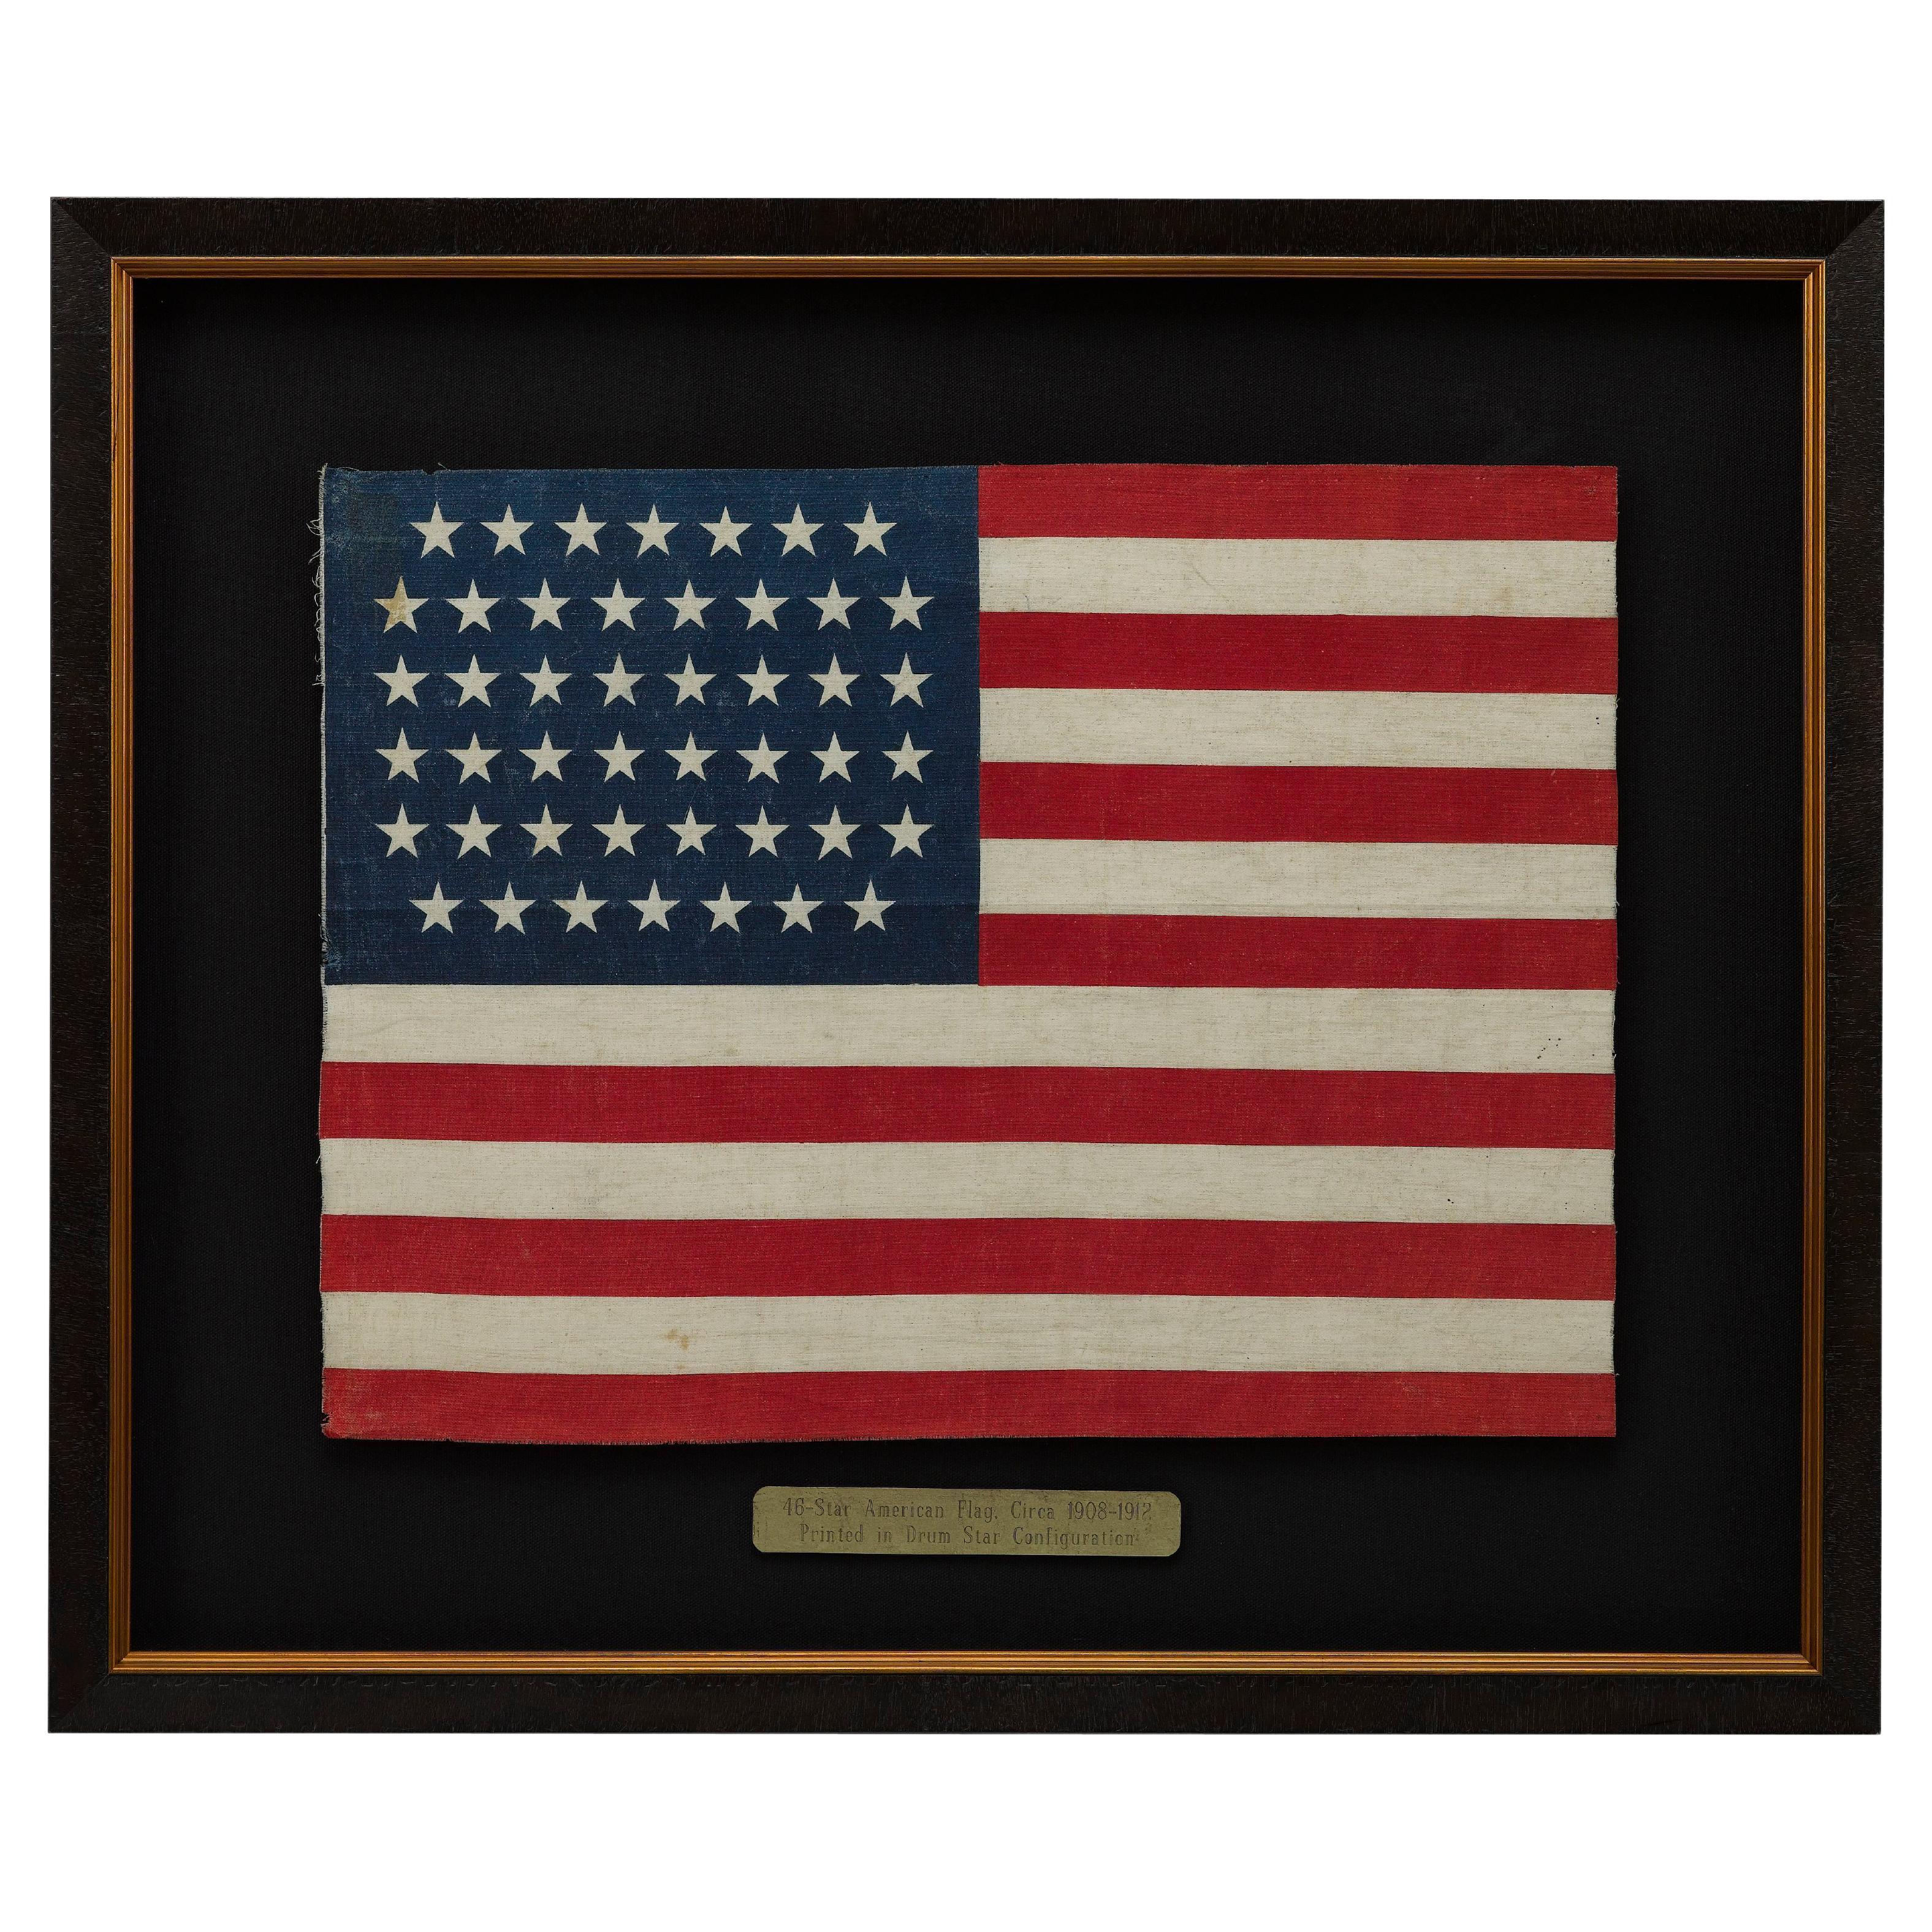 46-Star American Flag Printed in Drum Star Configuration